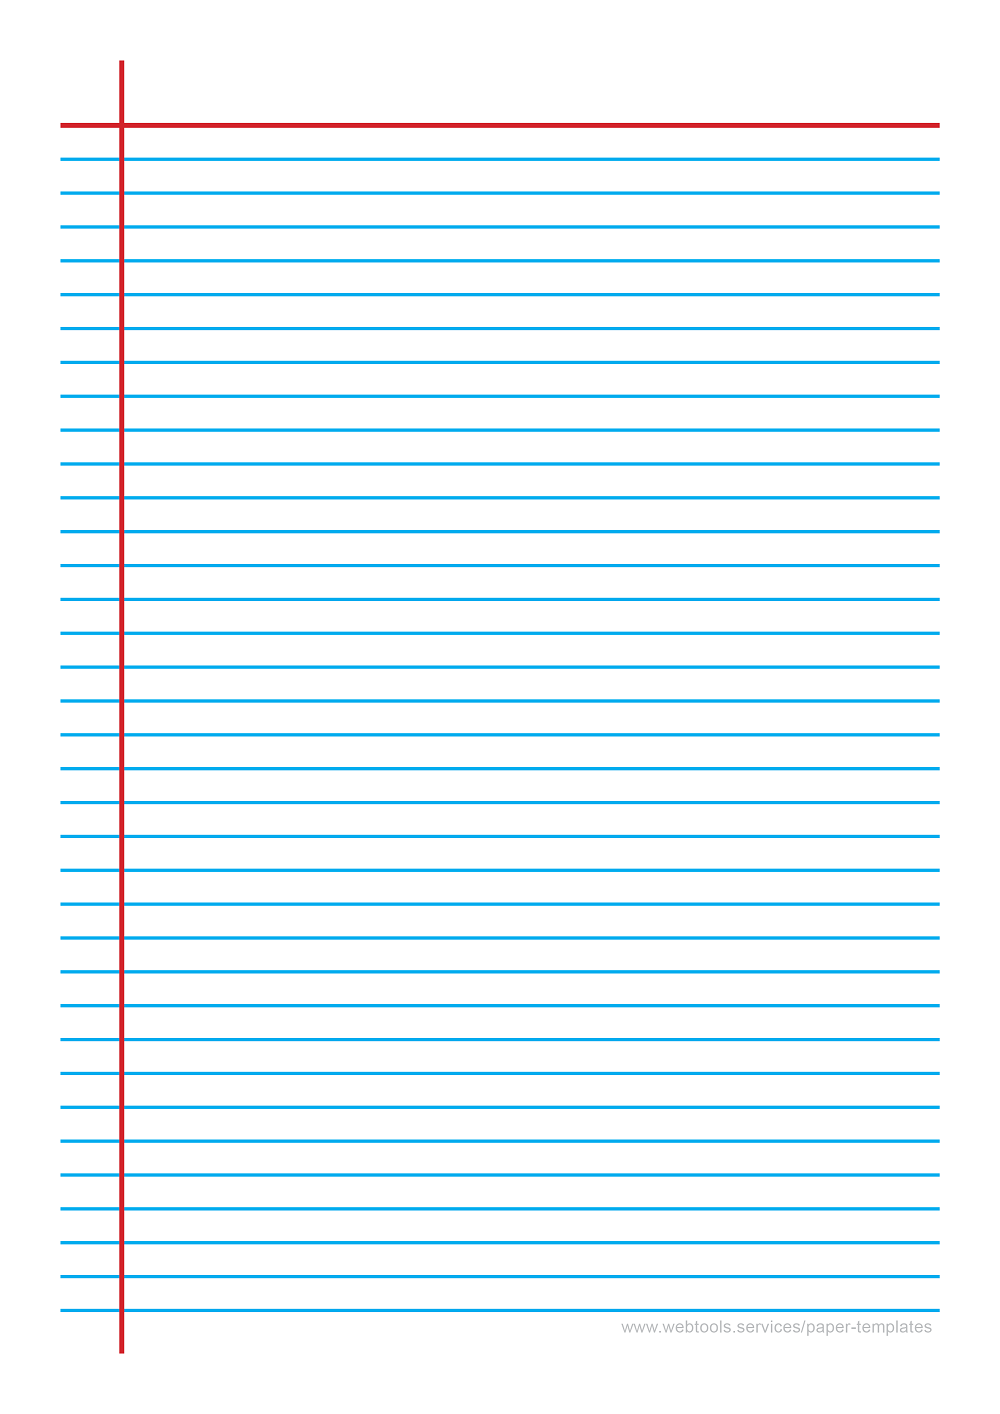 Blue Line Writing Paper Template With Horizontal And Vertical Margins And 7.1mm Line Height